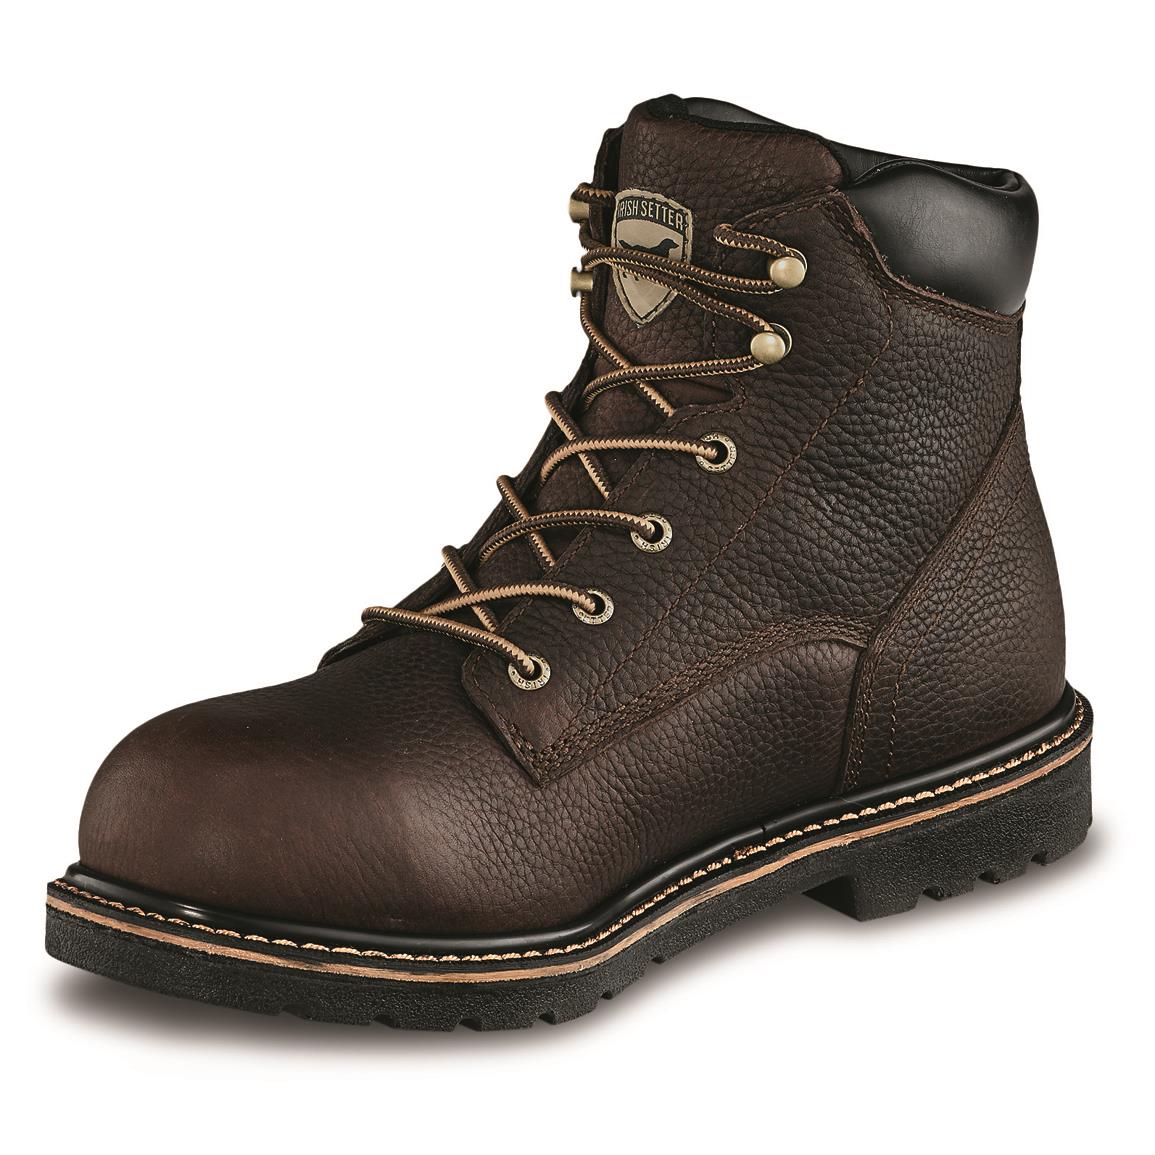 Full Grain Leather Work Boots | Sportsman's Guide